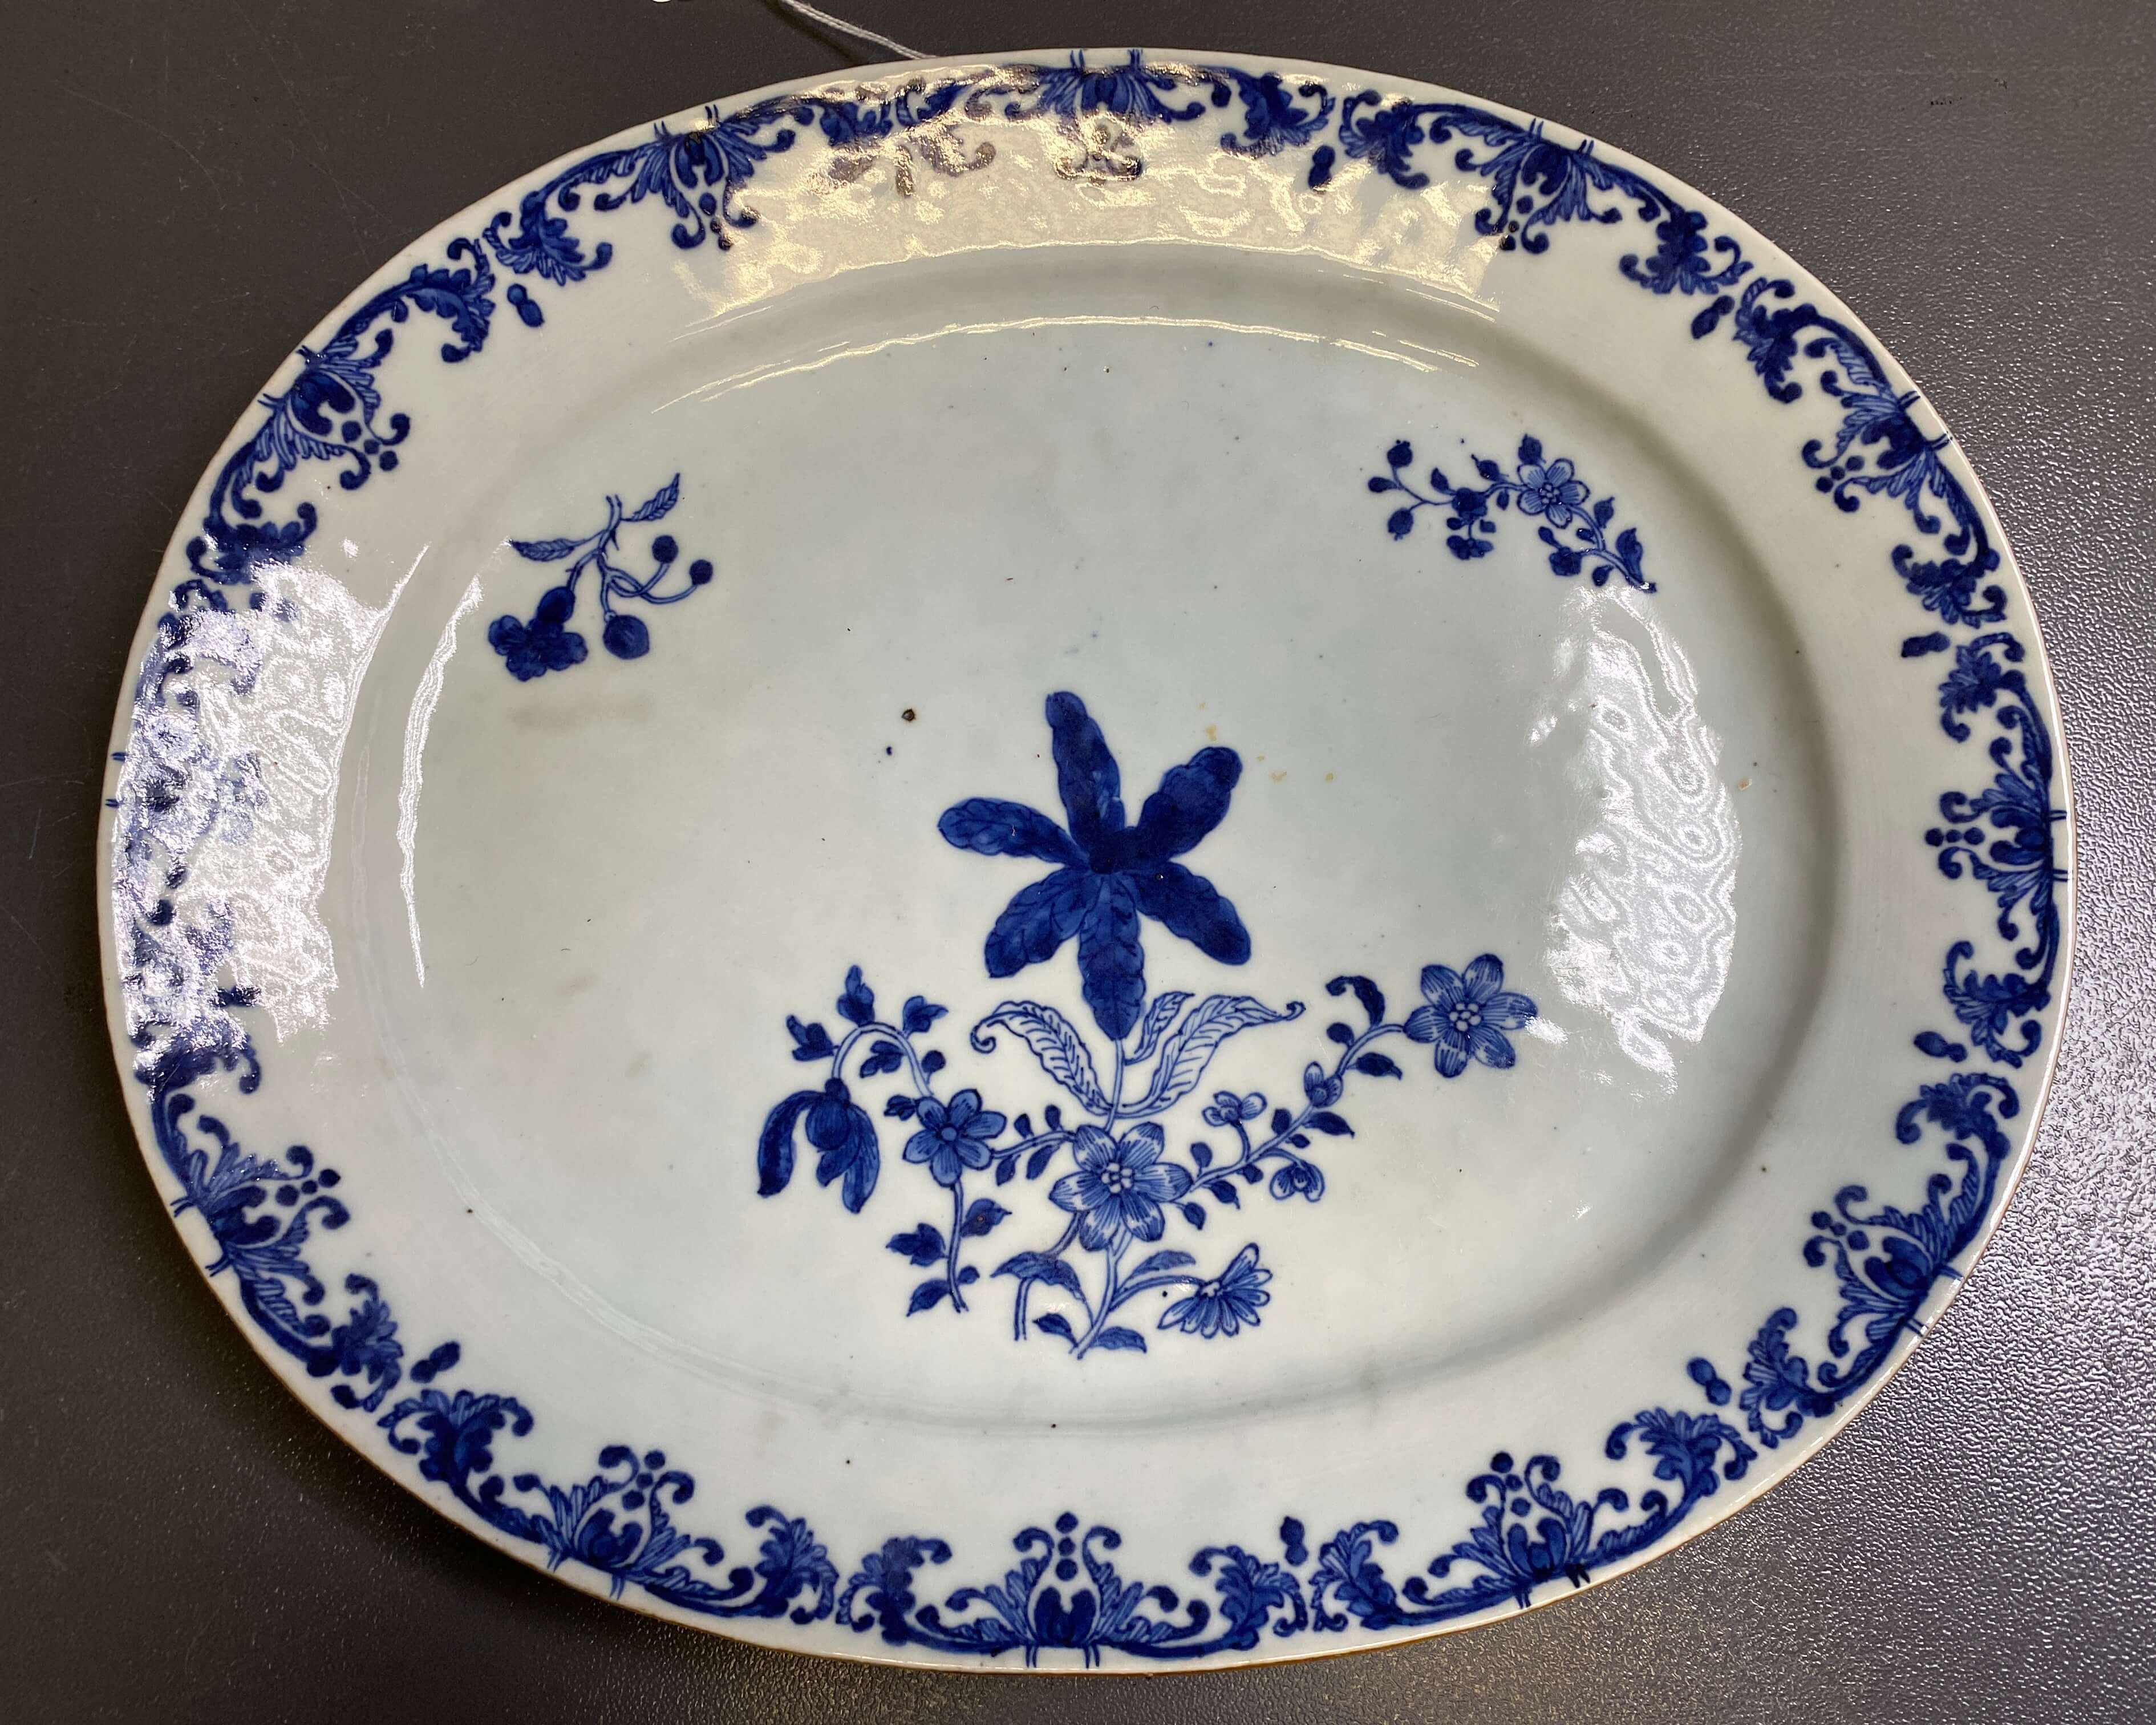 A pair of Chinese Export blue and white dishes, Qianlong period, 1735-1796